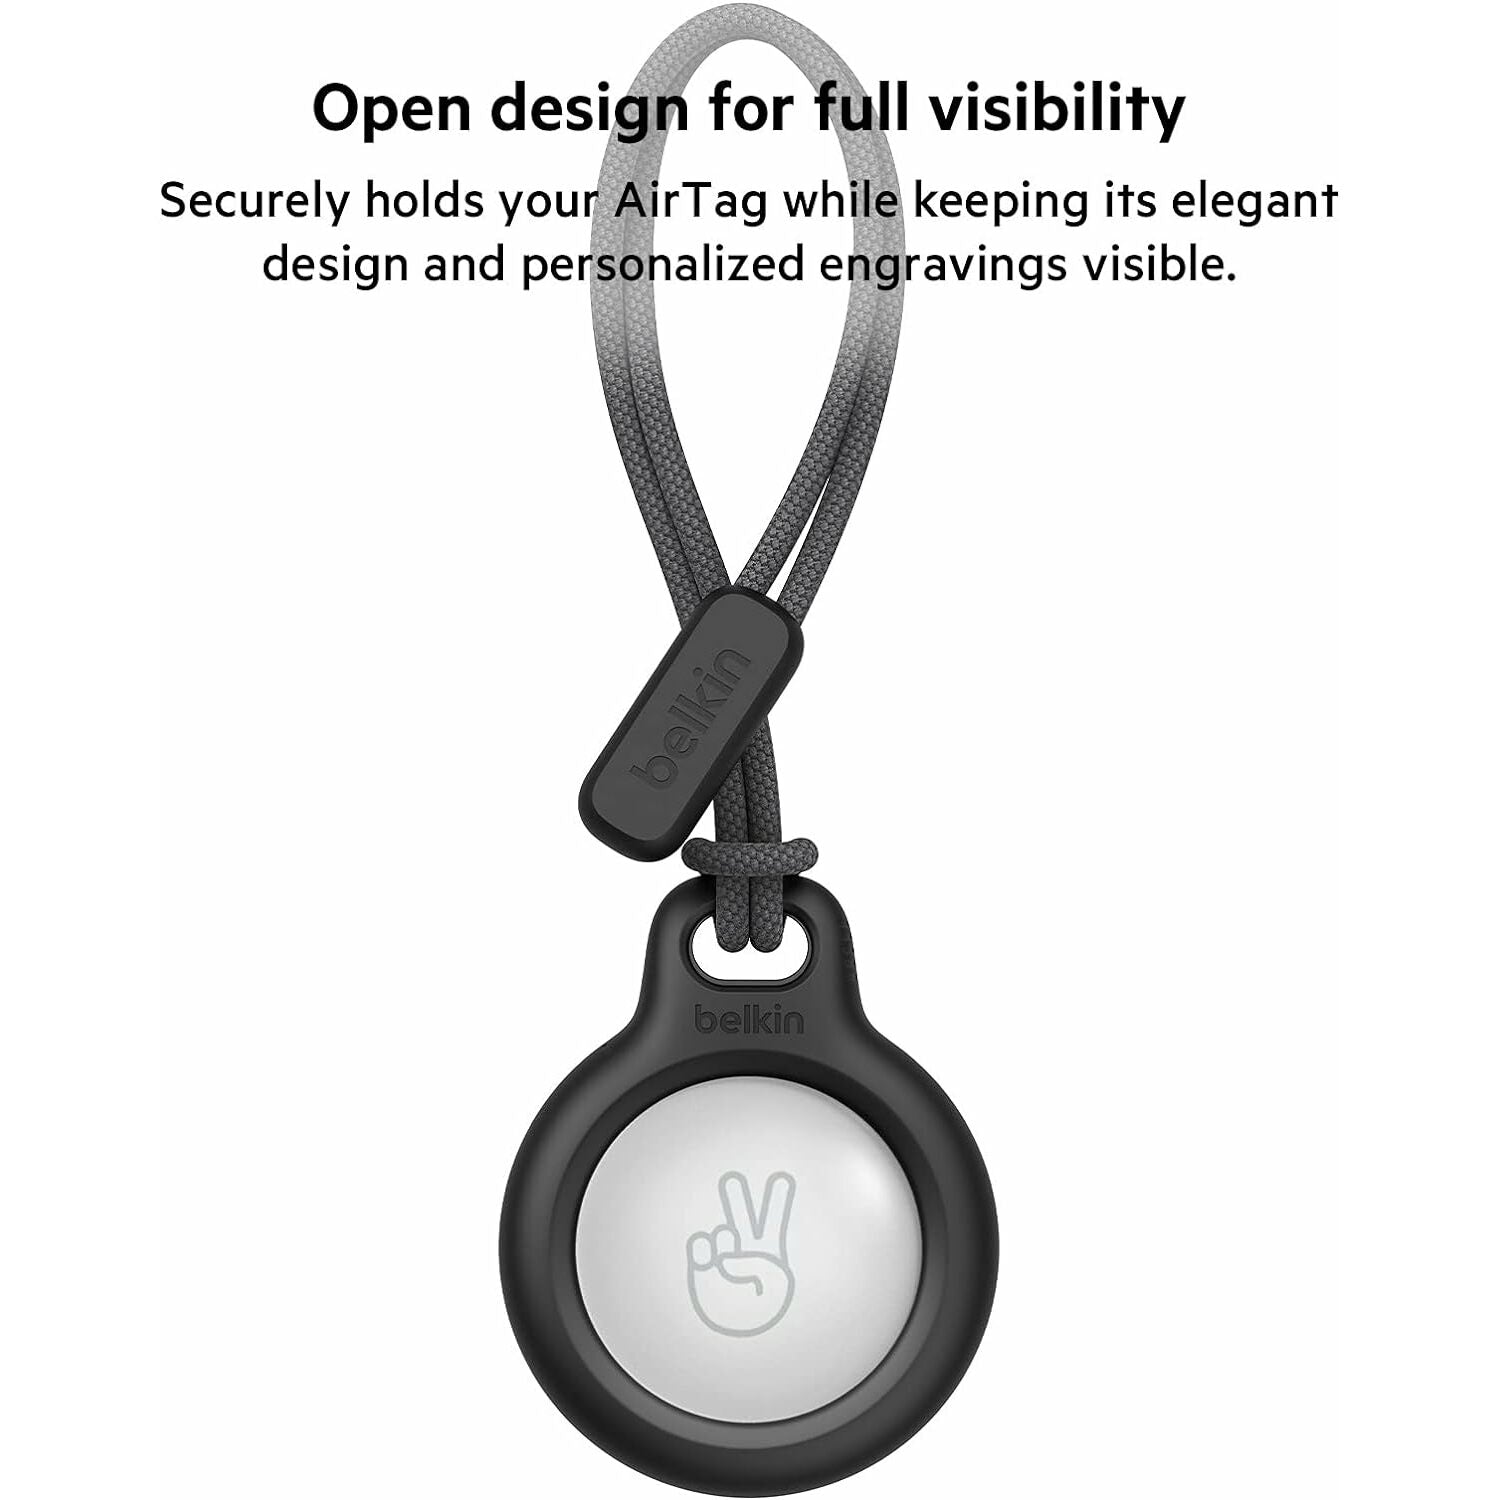 Belkin Secure Holder Keychain with Strap for Apple AirTag - Black